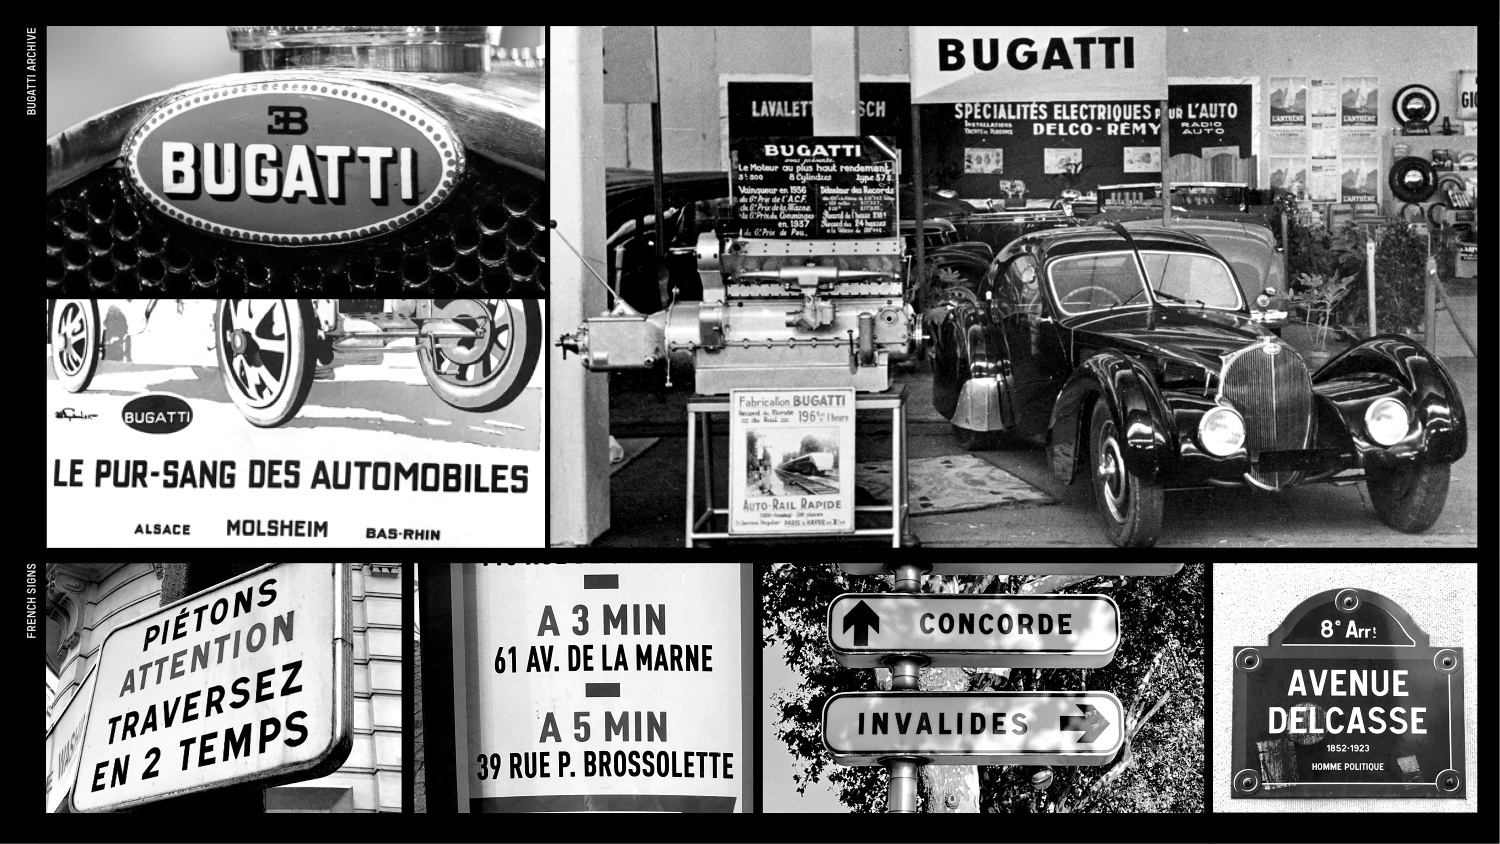 Inspiration for the new Bugatti logo and typography